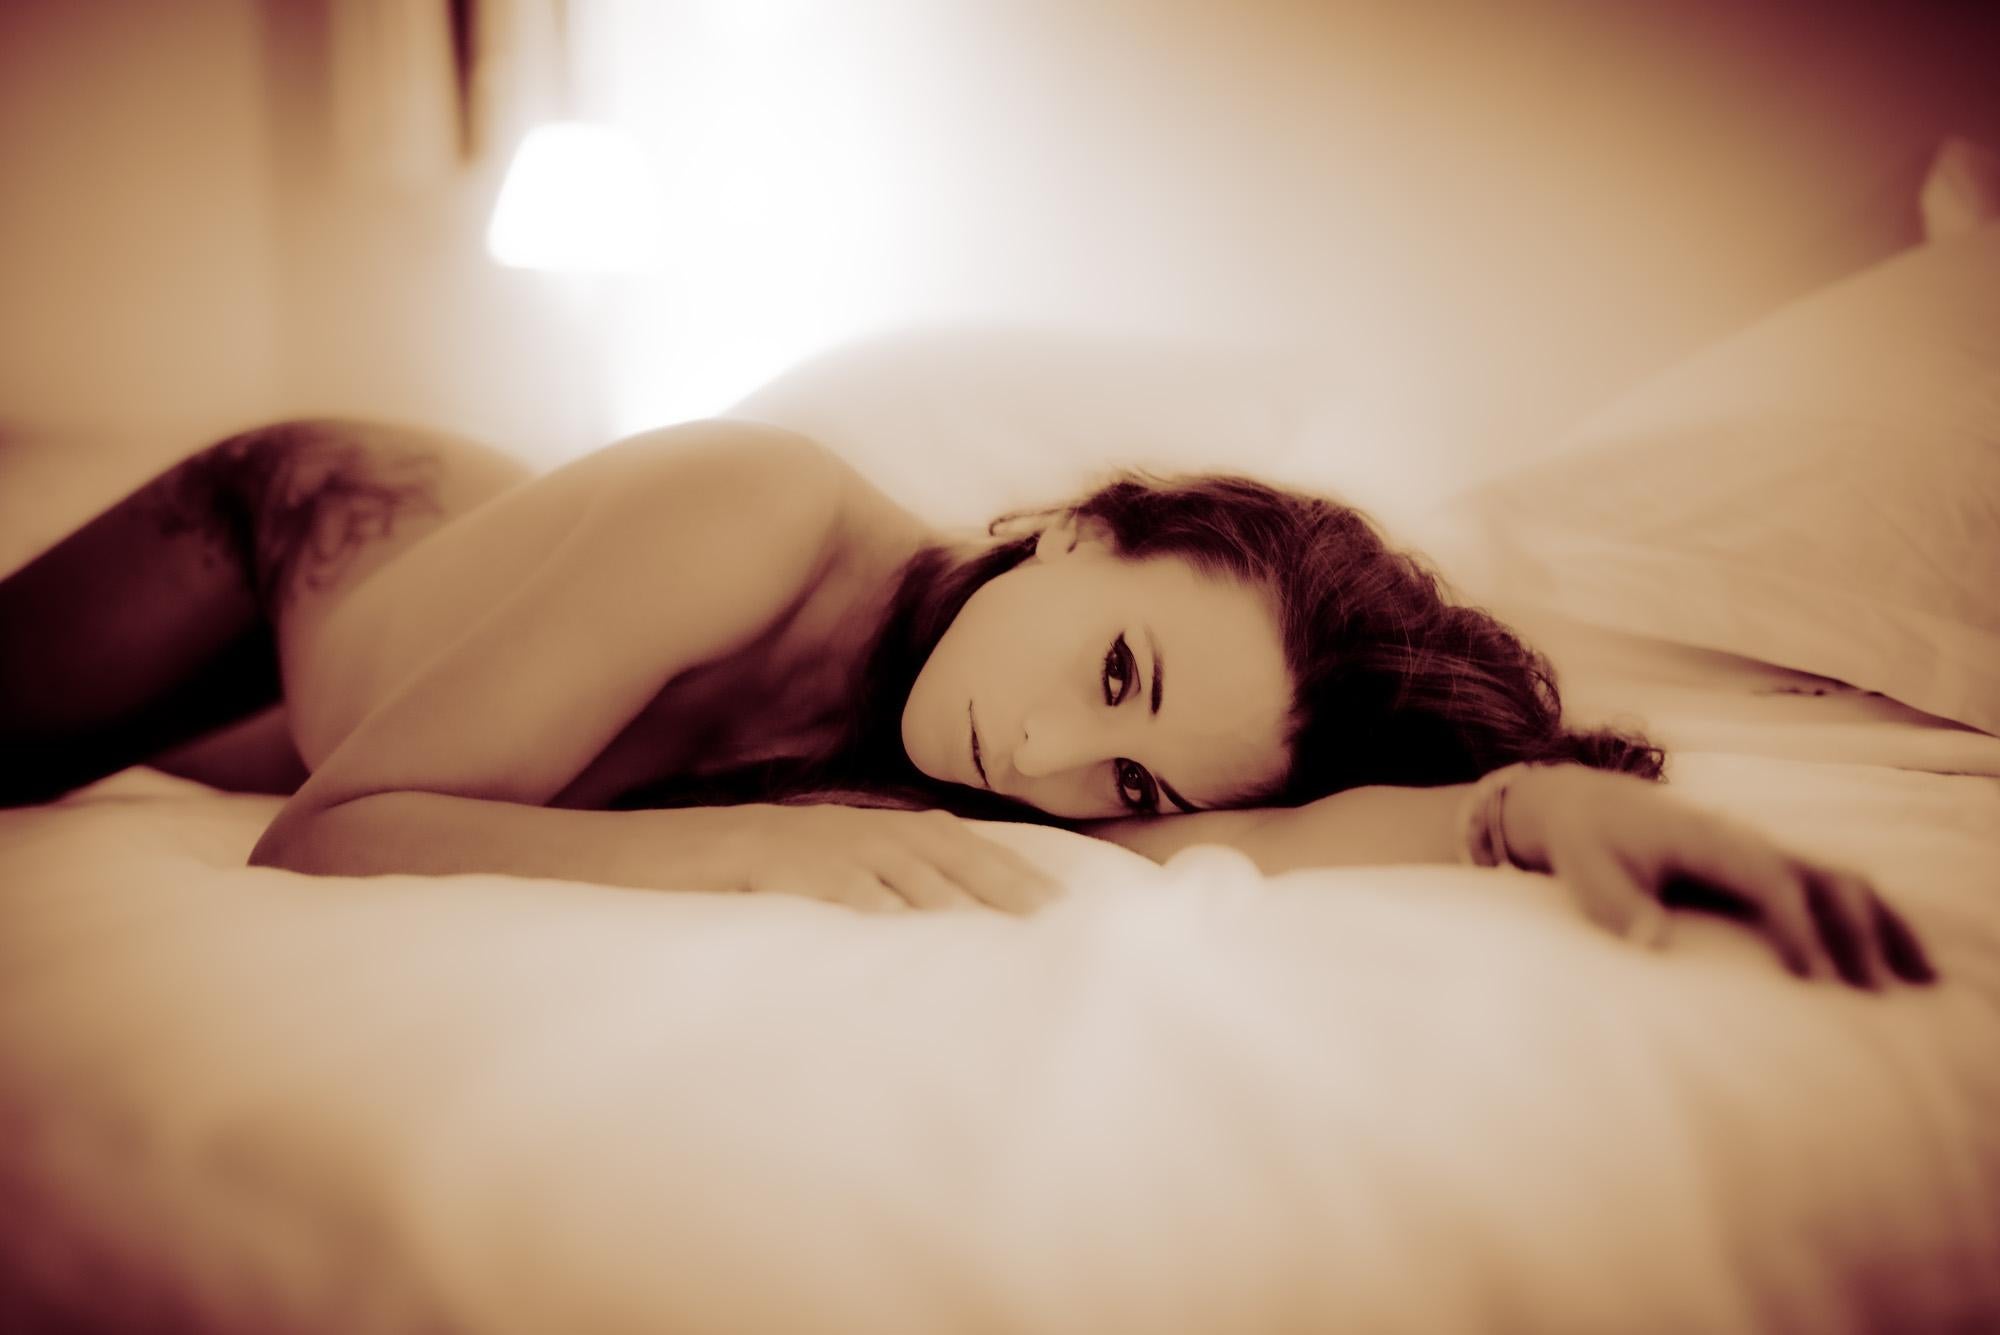 Room 102 - Collector Portfolio # 6 out 7 -  12 Fine Art Prints Nude photography For Sale 12